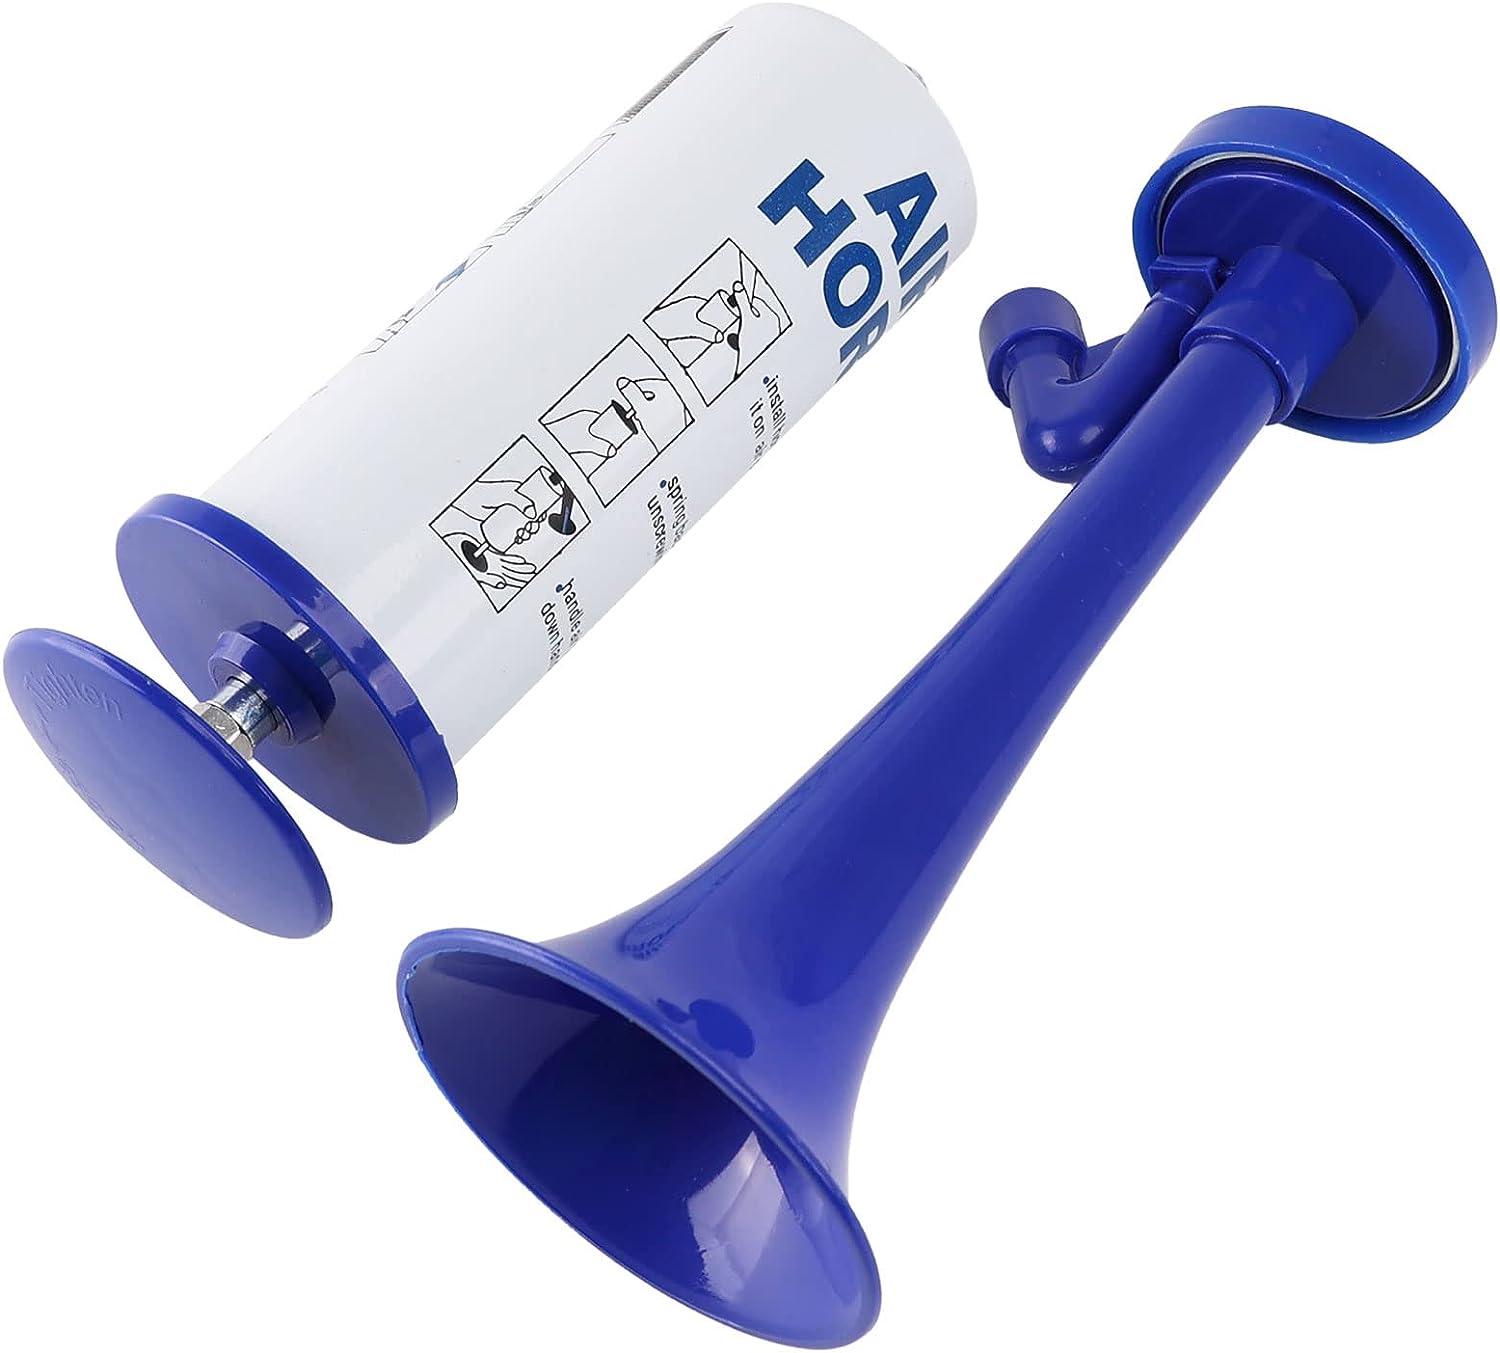 Air Horn for Safety, Loud HandHeld Air Horn for Boats Events Camping  Reusable, Sports Pump Horn Loud Noise Maker Safety Horn for Boating Sports  Events Birthday Party BANHAO Pump horn BLUE